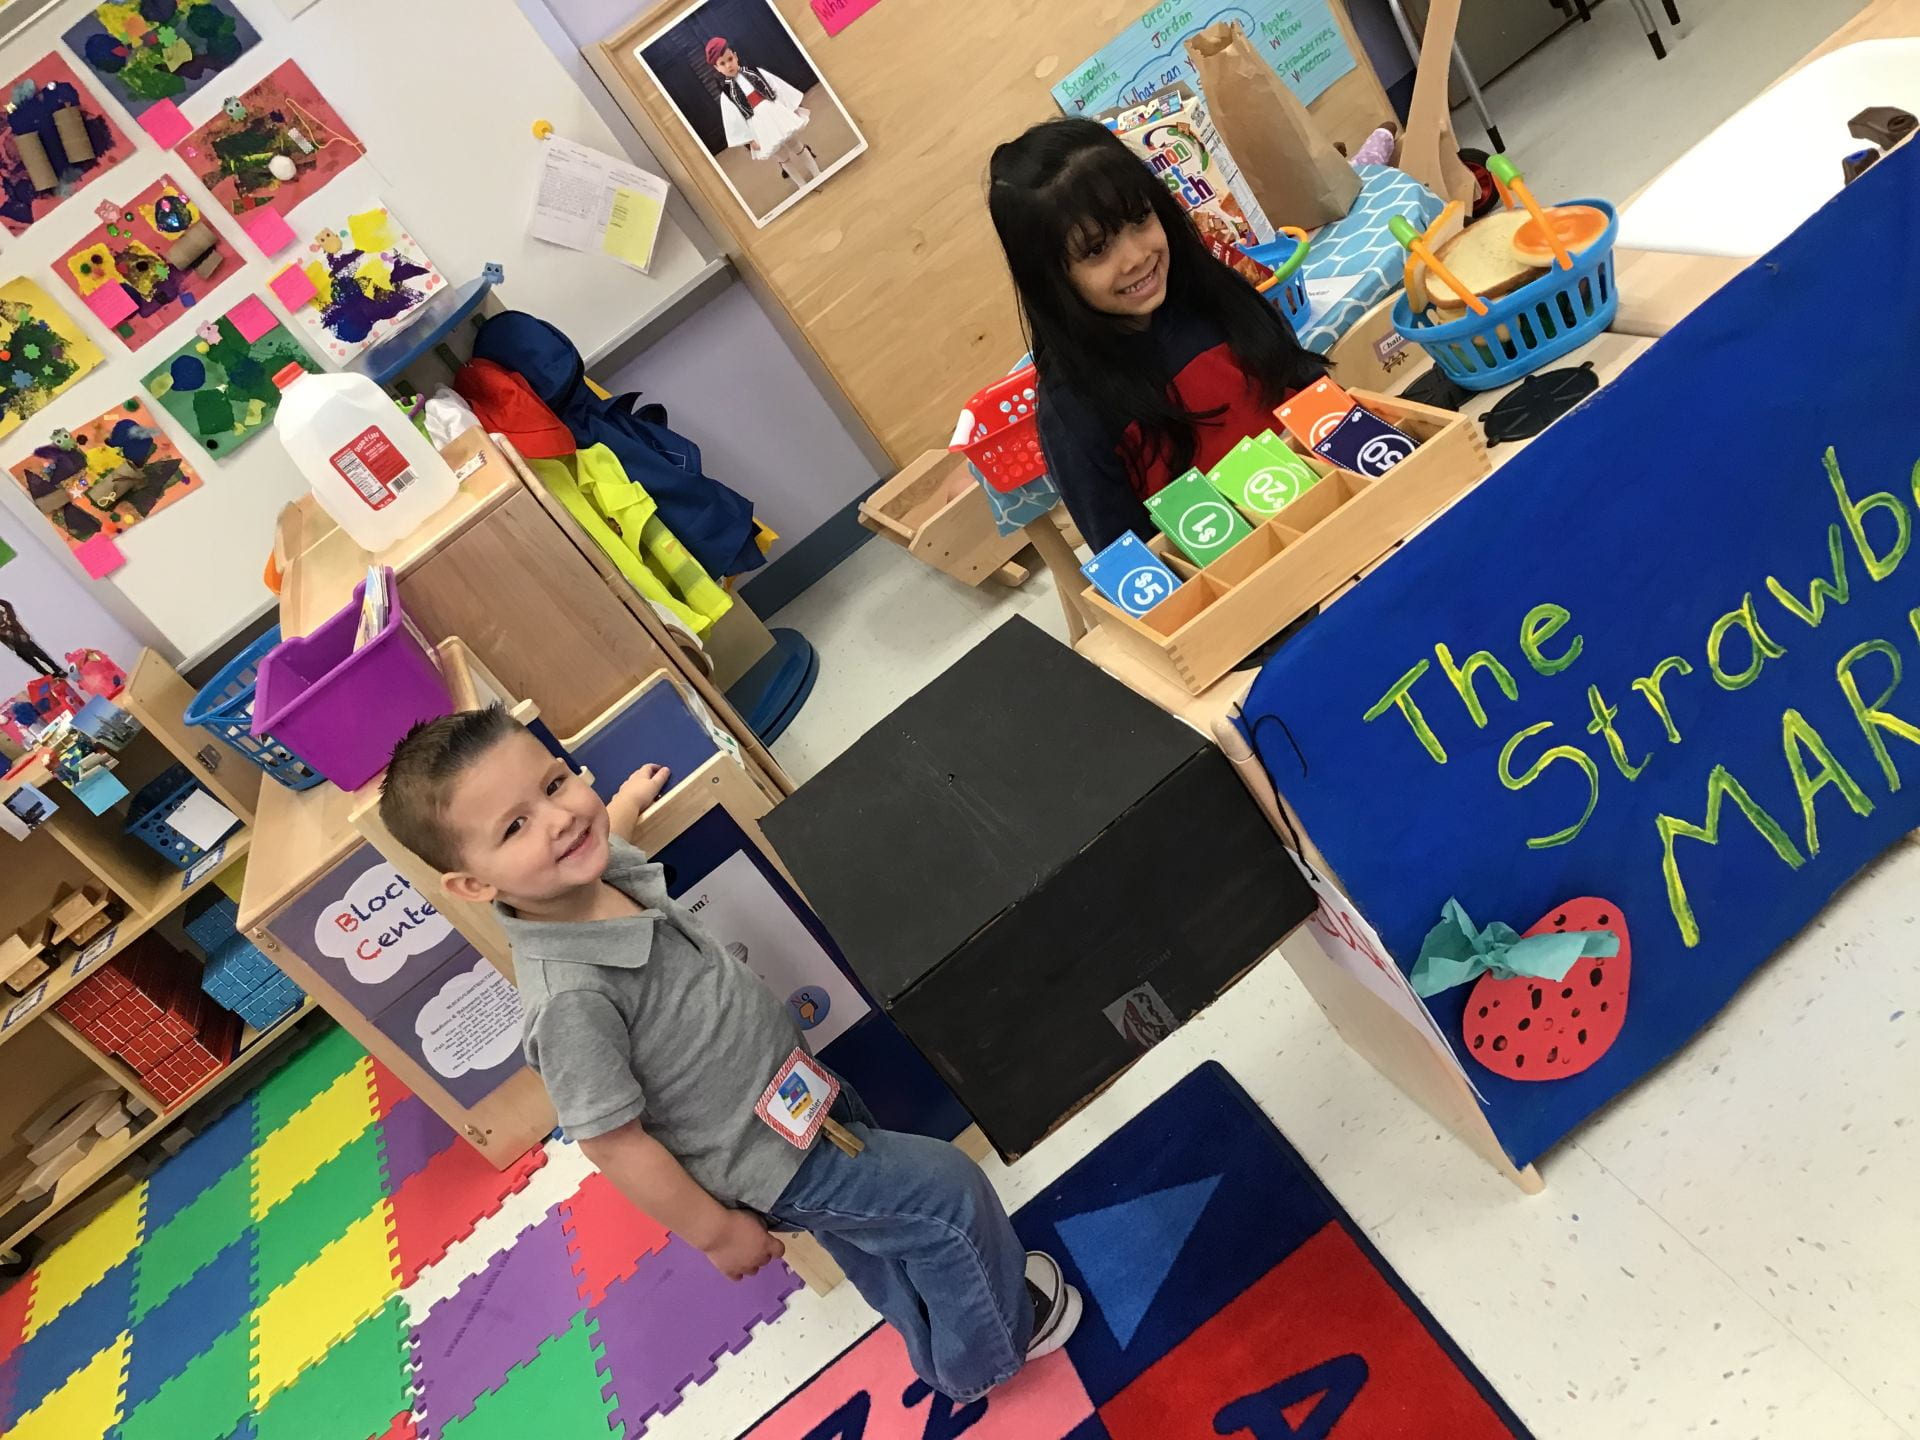 children playing in the dramatic play center transformed into a strawberry market